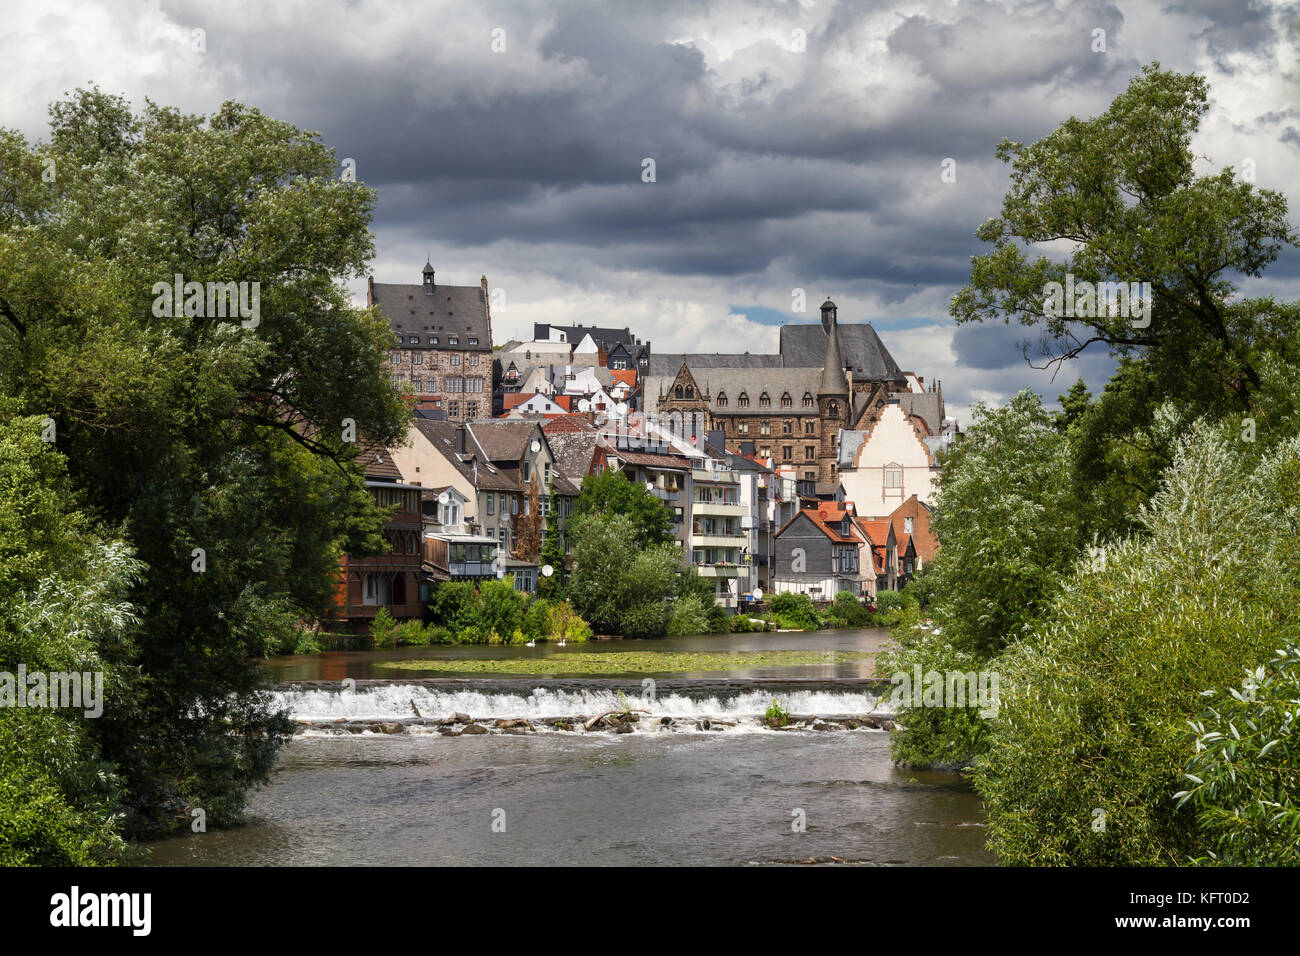 City of Marburg at the river Lahn, Hesse, Germany Stock Photo